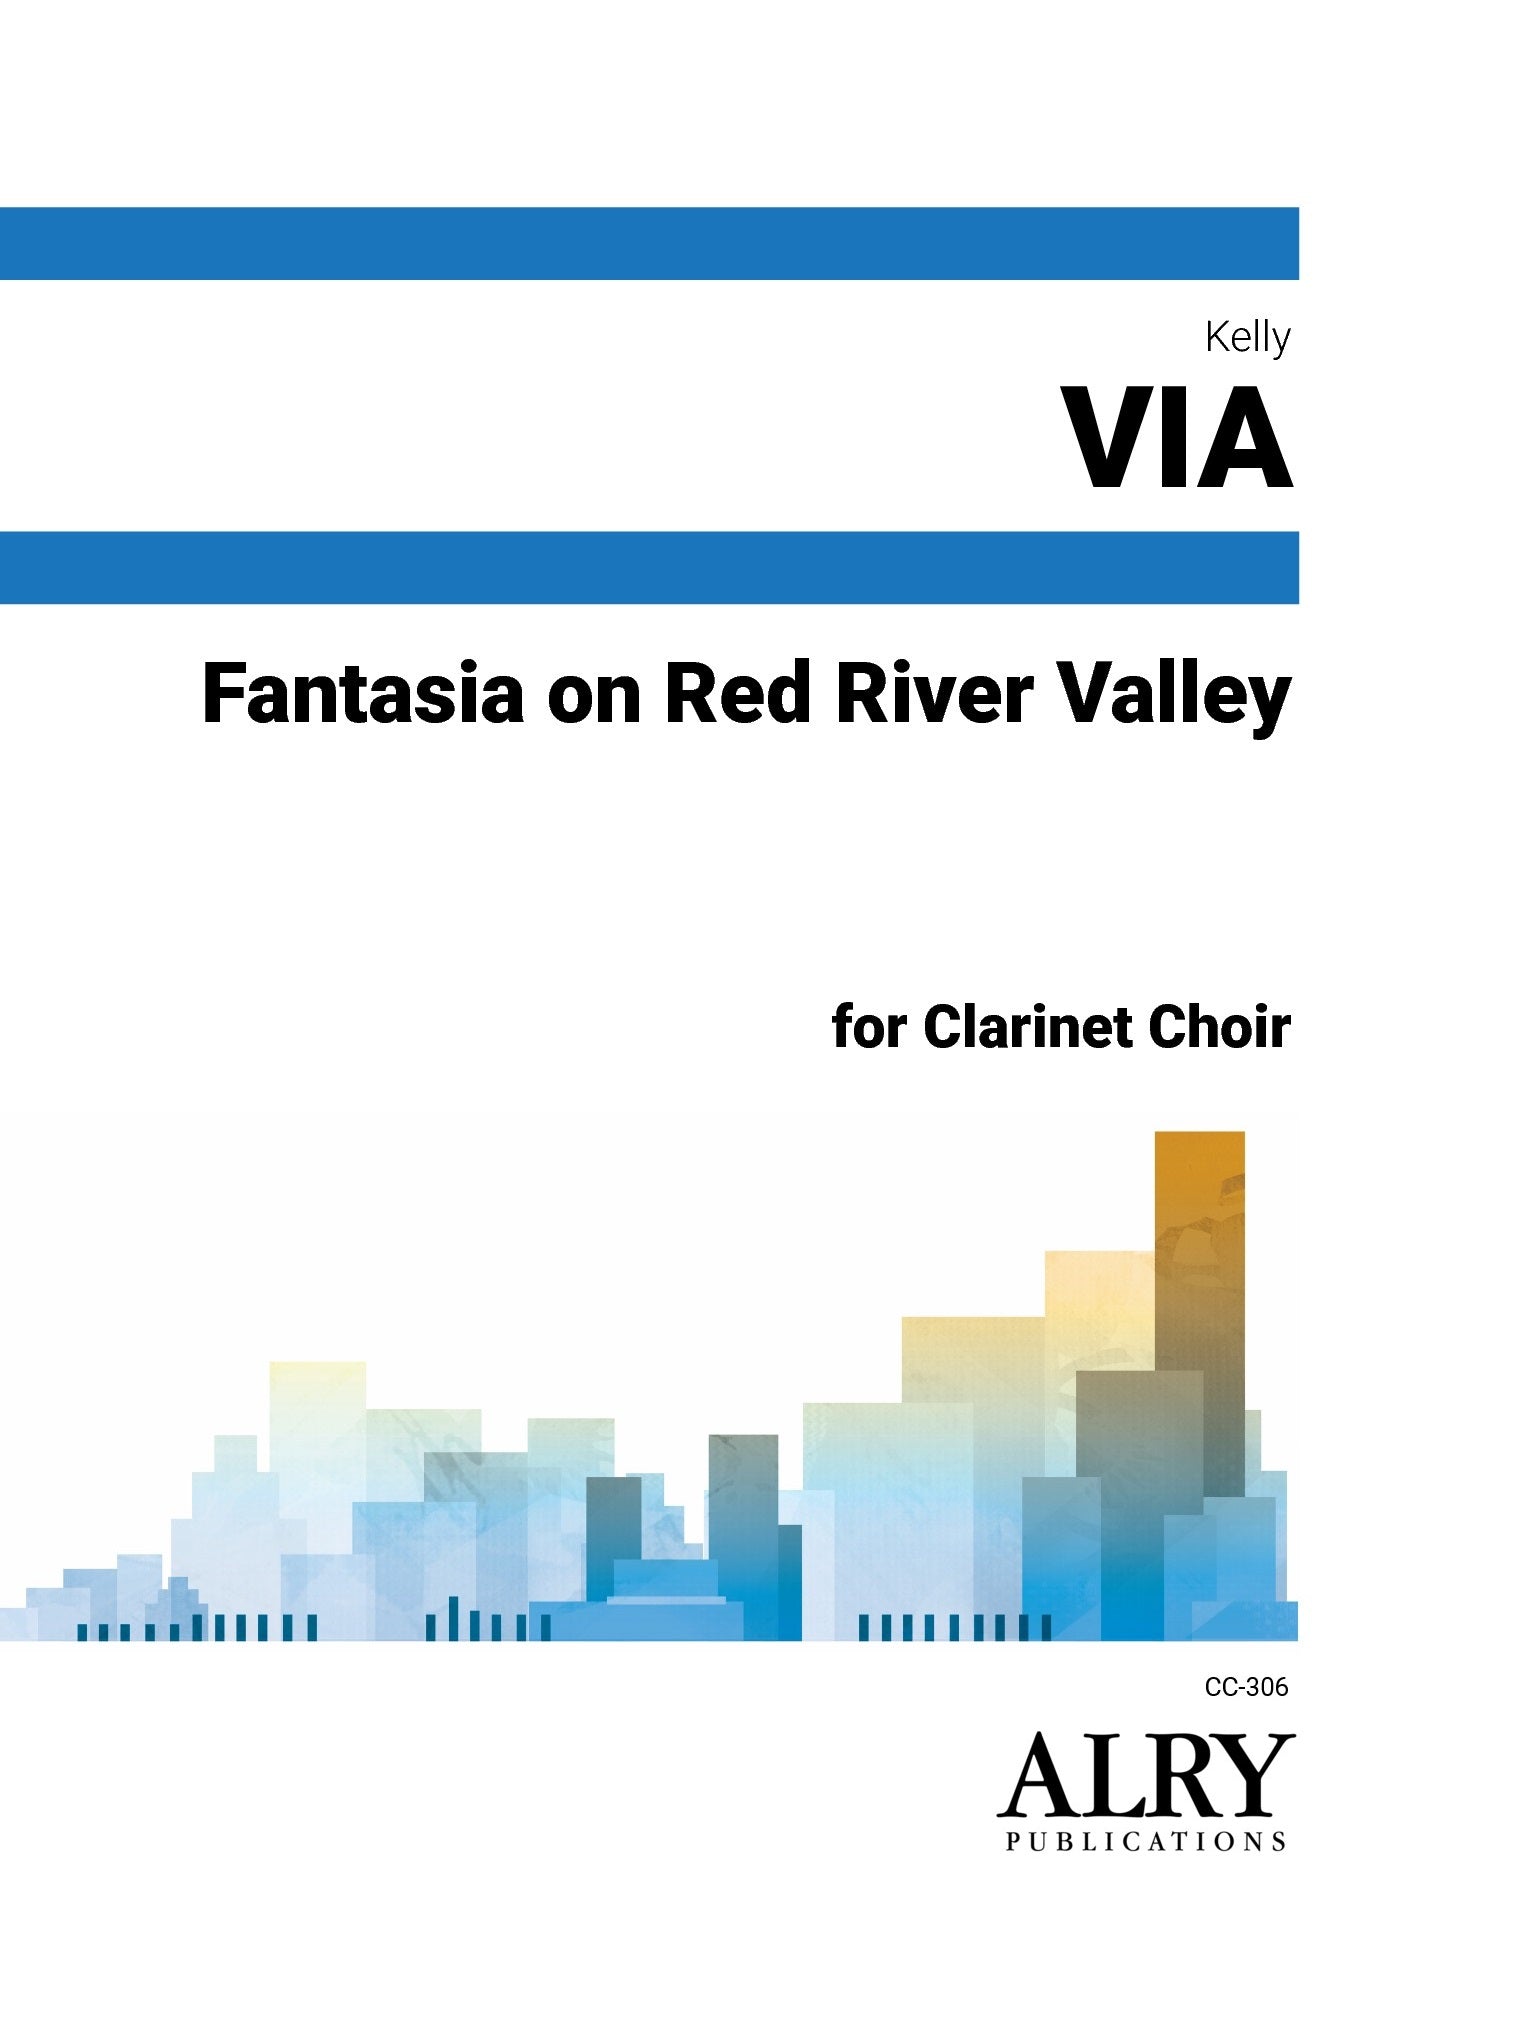 Via - Fantasia on Red River Valley for Clarinet Choir